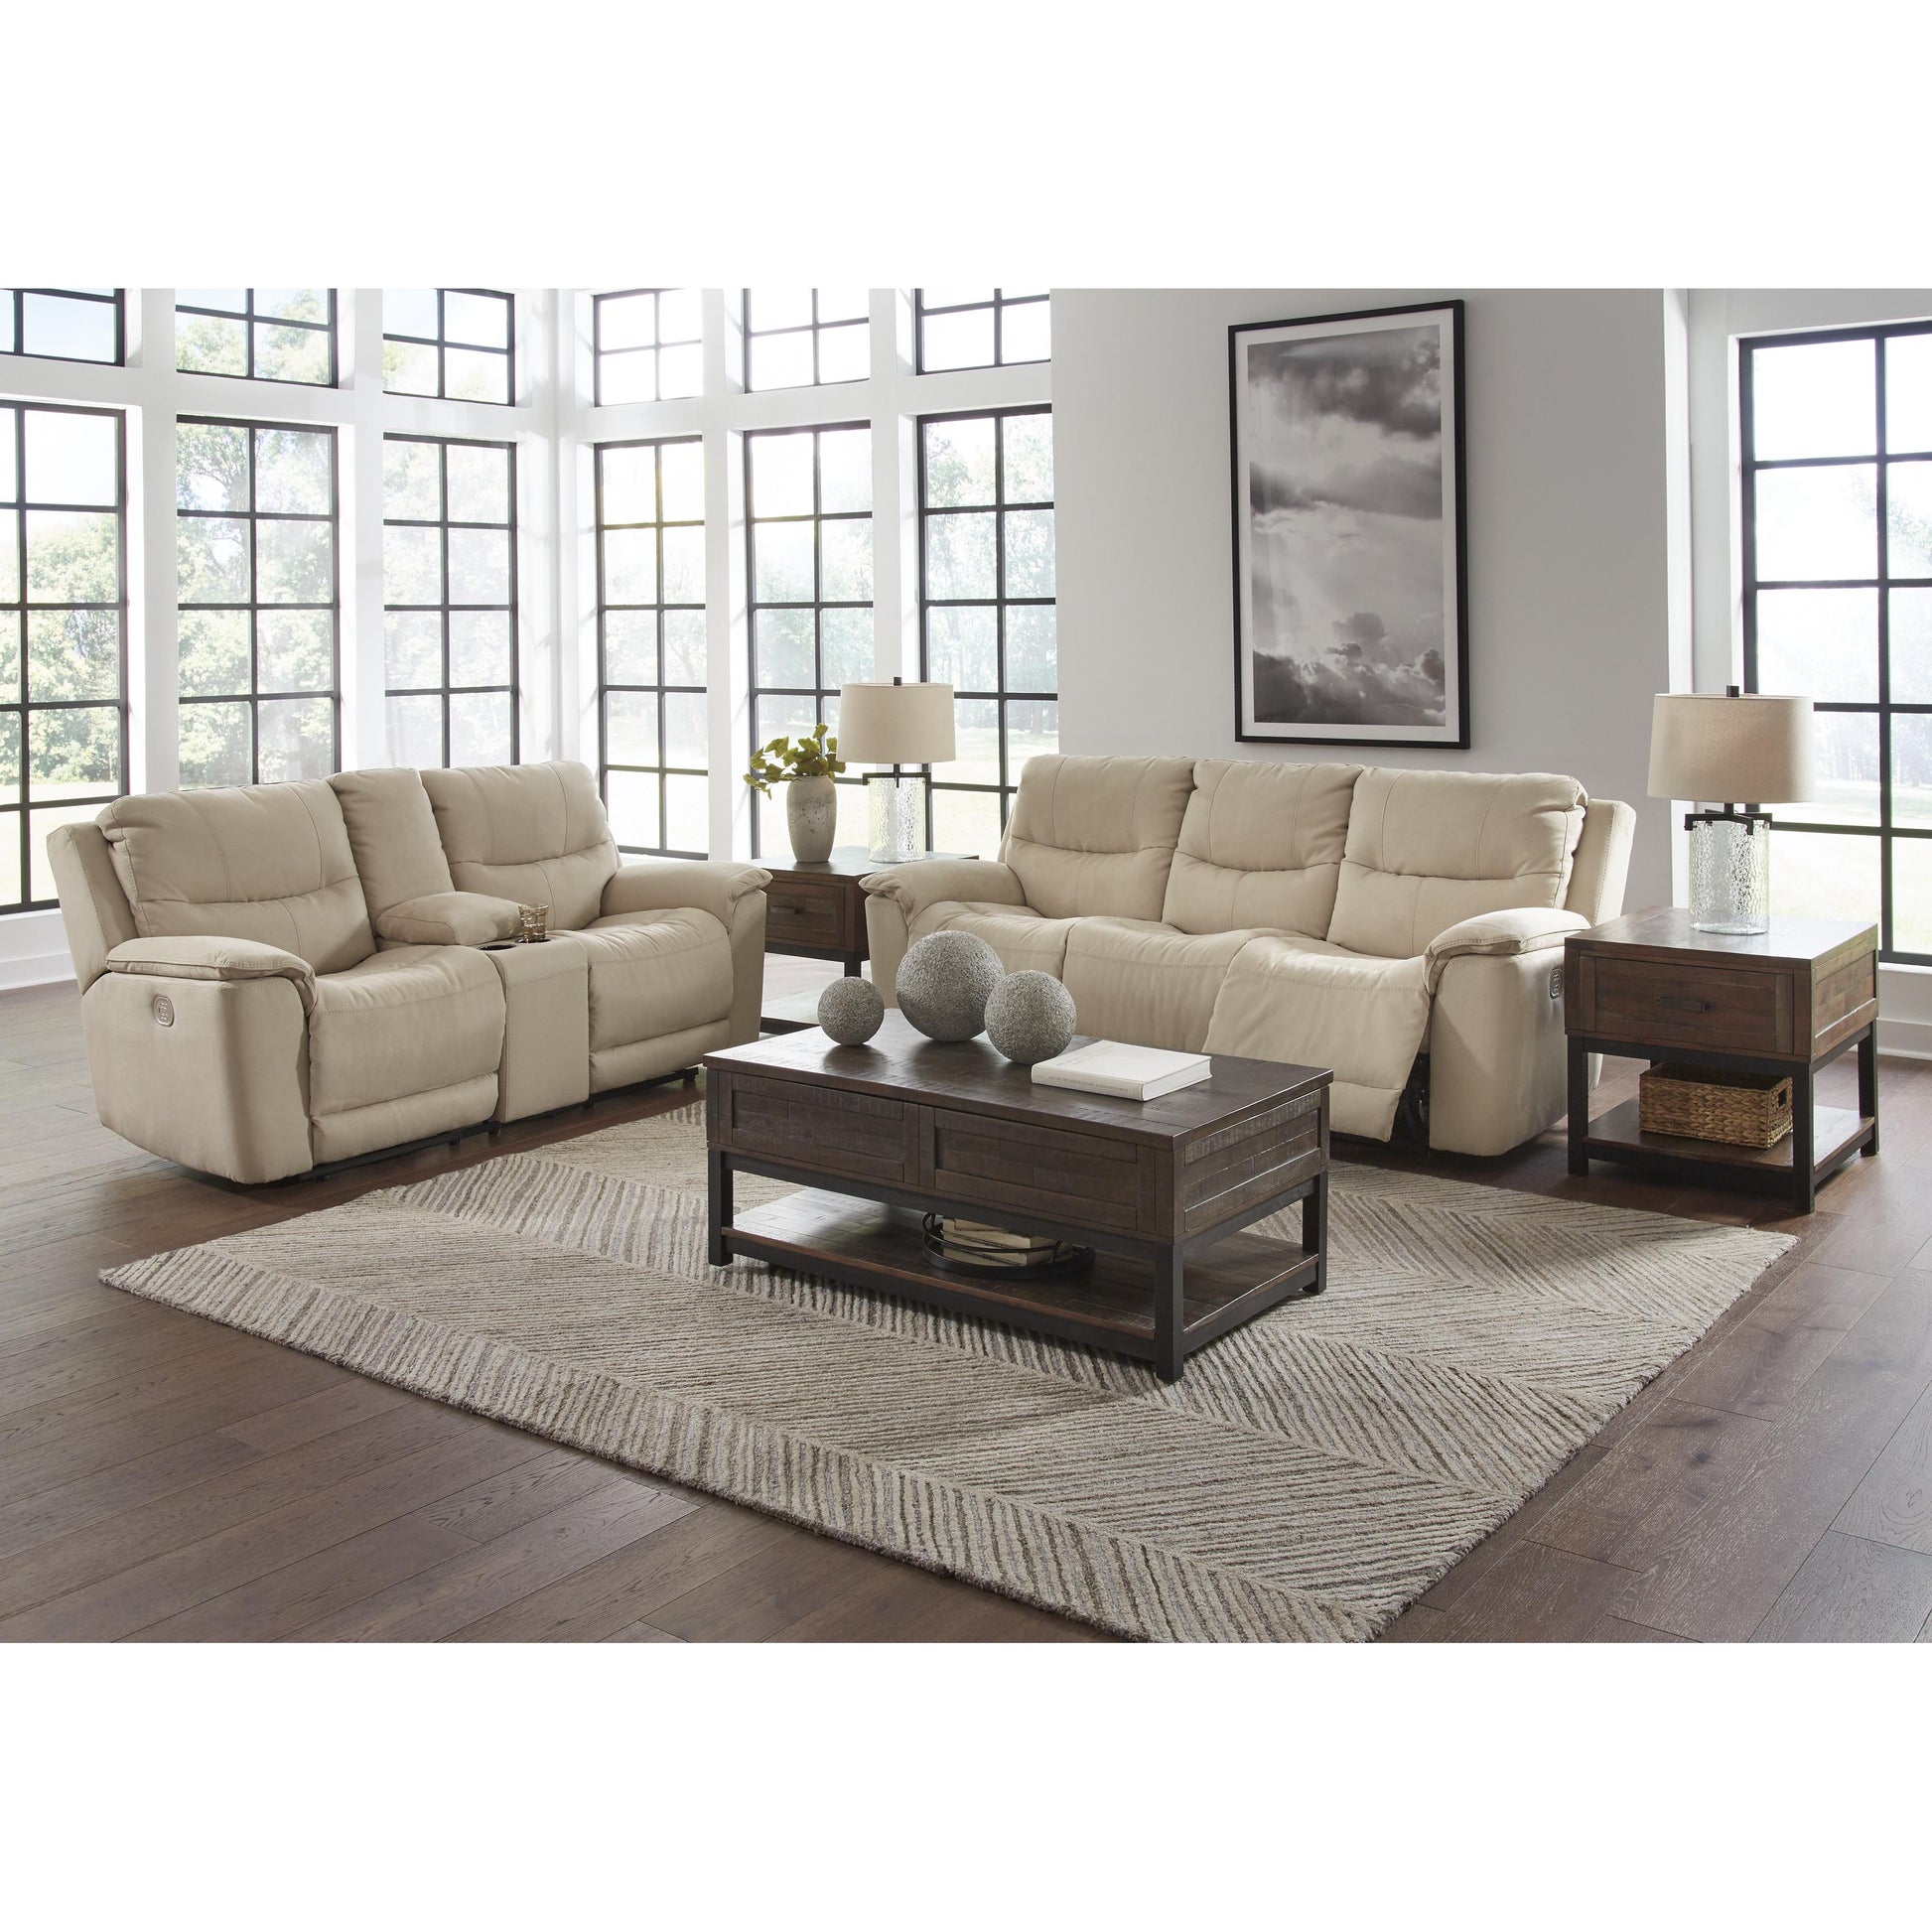 Signature Design by Ashley Next-Gen Gaucho Power Reclining Leather Look Loveseat 6080718 IMAGE 10